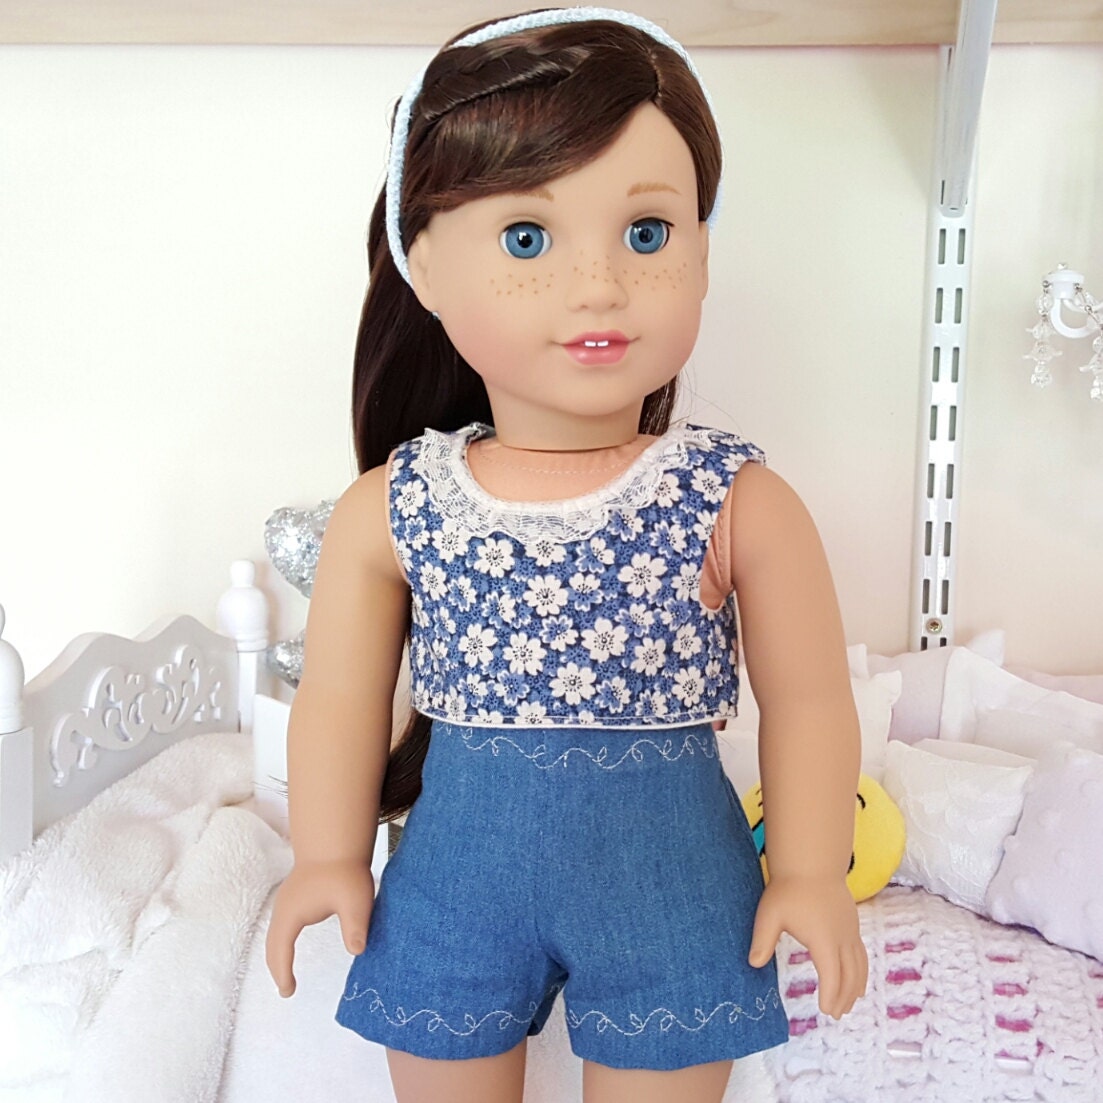 american girl doll crop top and shorts